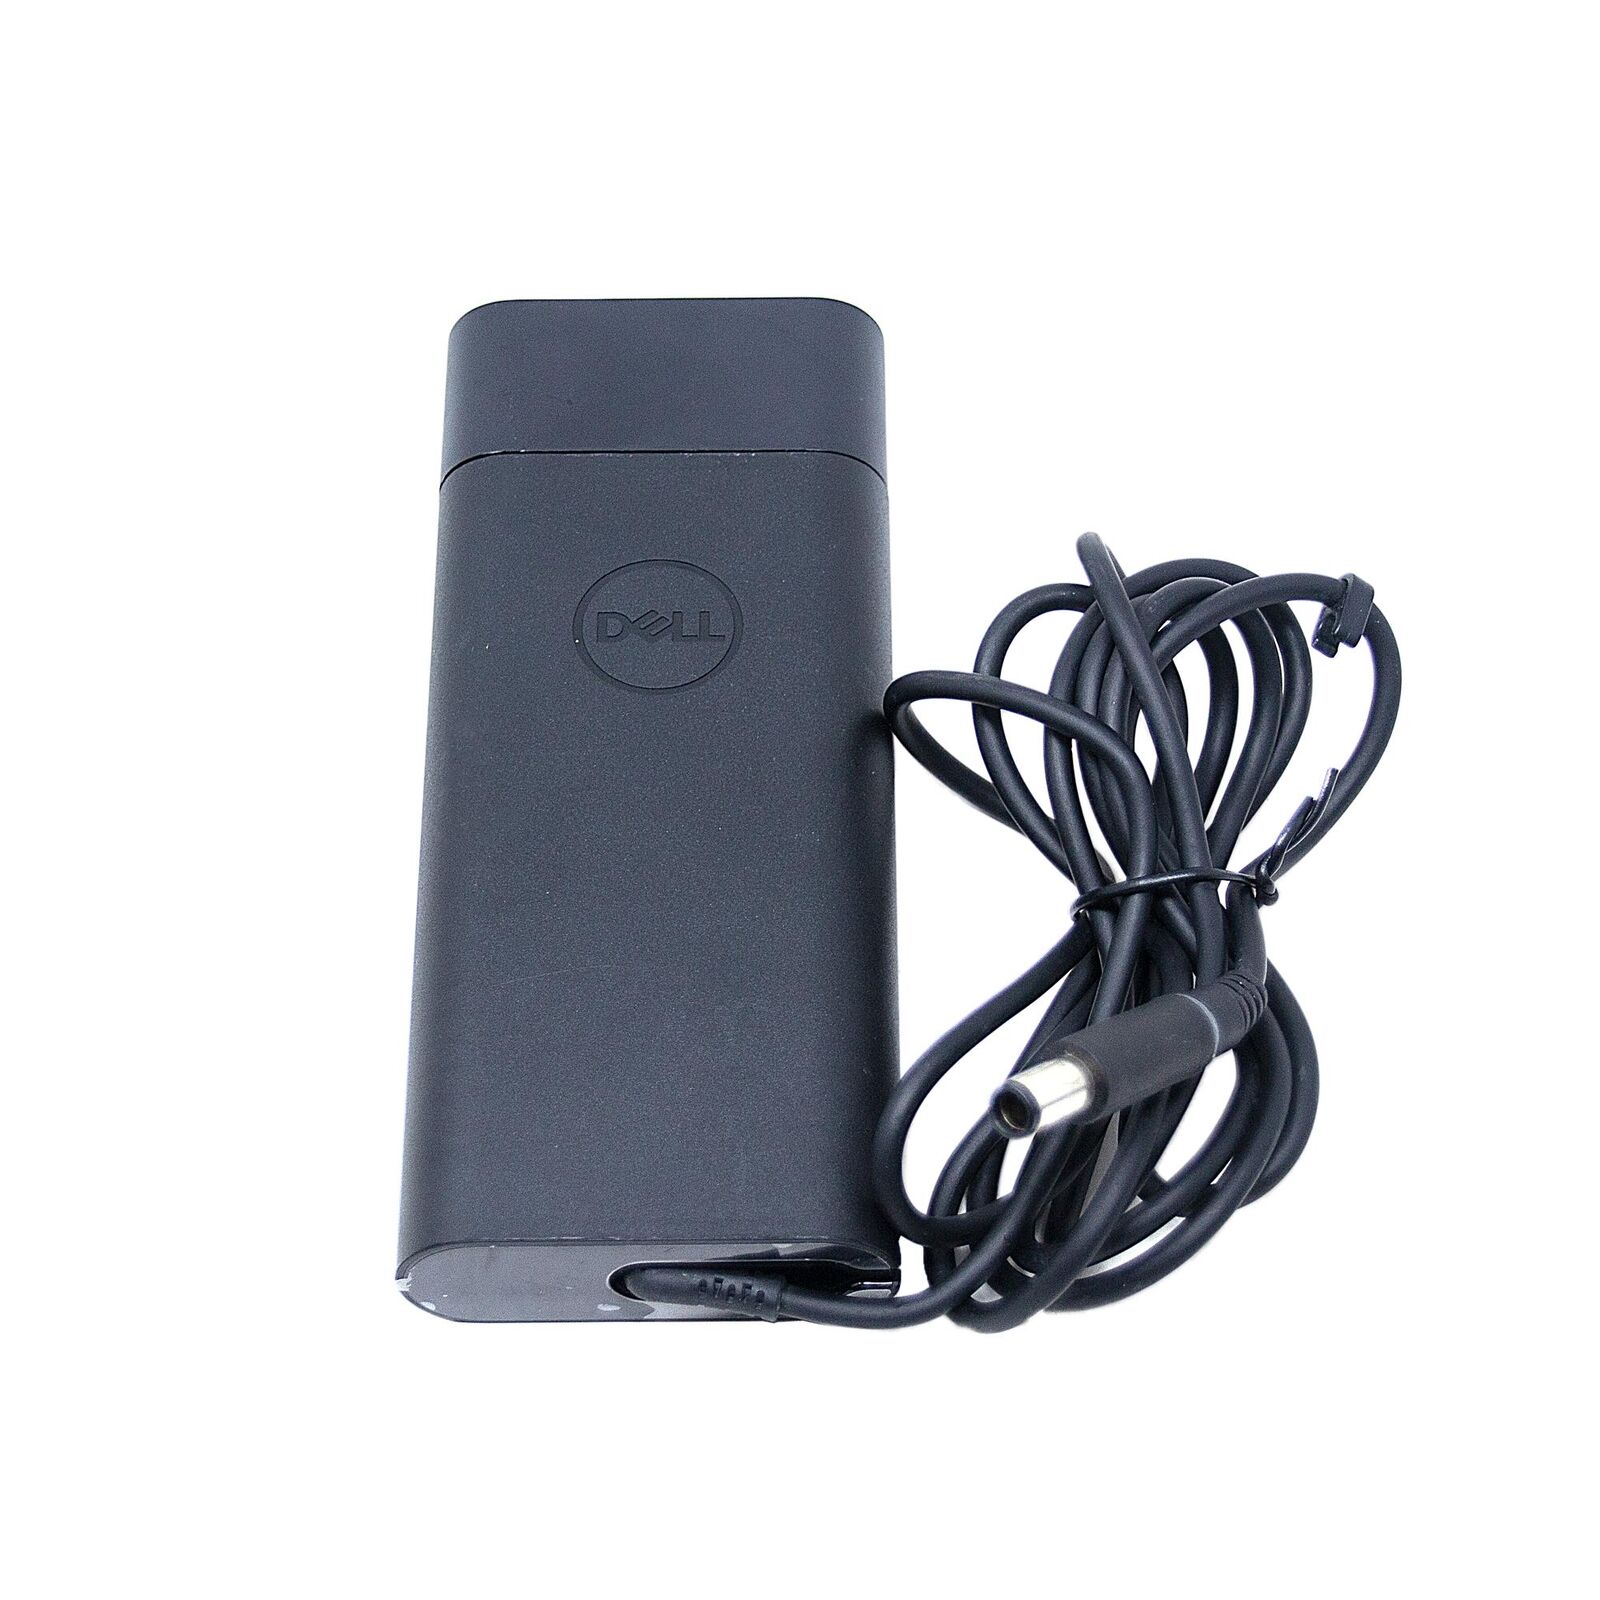 DELL ADP-90AH FA 19.5V 4.62A 90W Genuine Original AC Power Adapter Charger